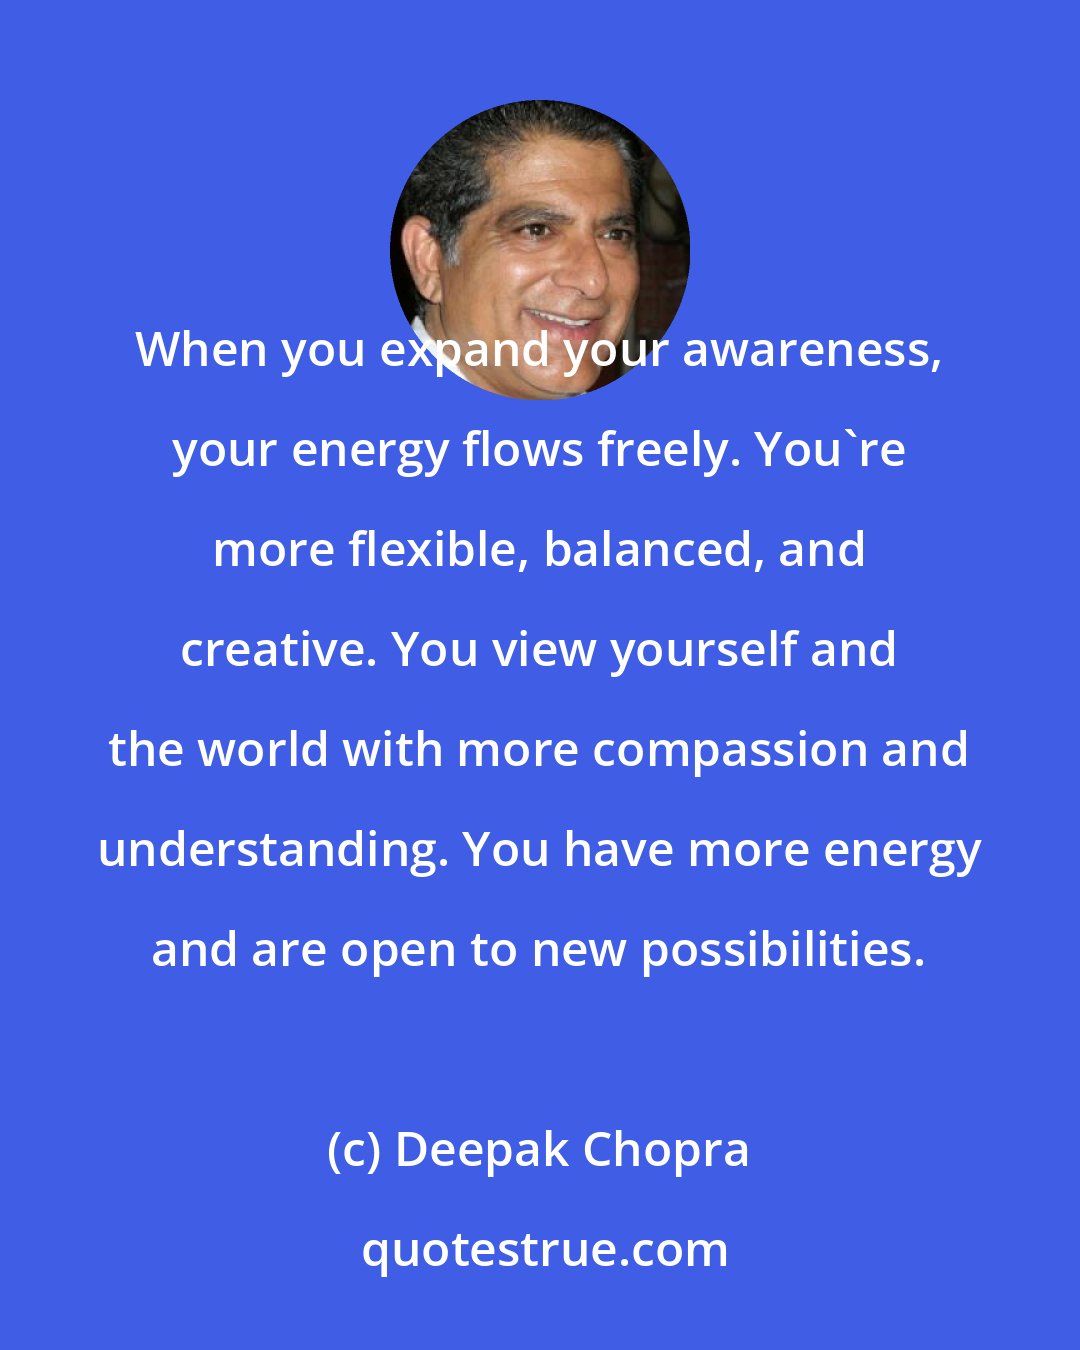 Deepak Chopra: When you expand your awareness, your energy flows freely. You're more flexible, balanced, and creative. You view yourself and the world with more compassion and understanding. You have more energy and are open to new possibilities.